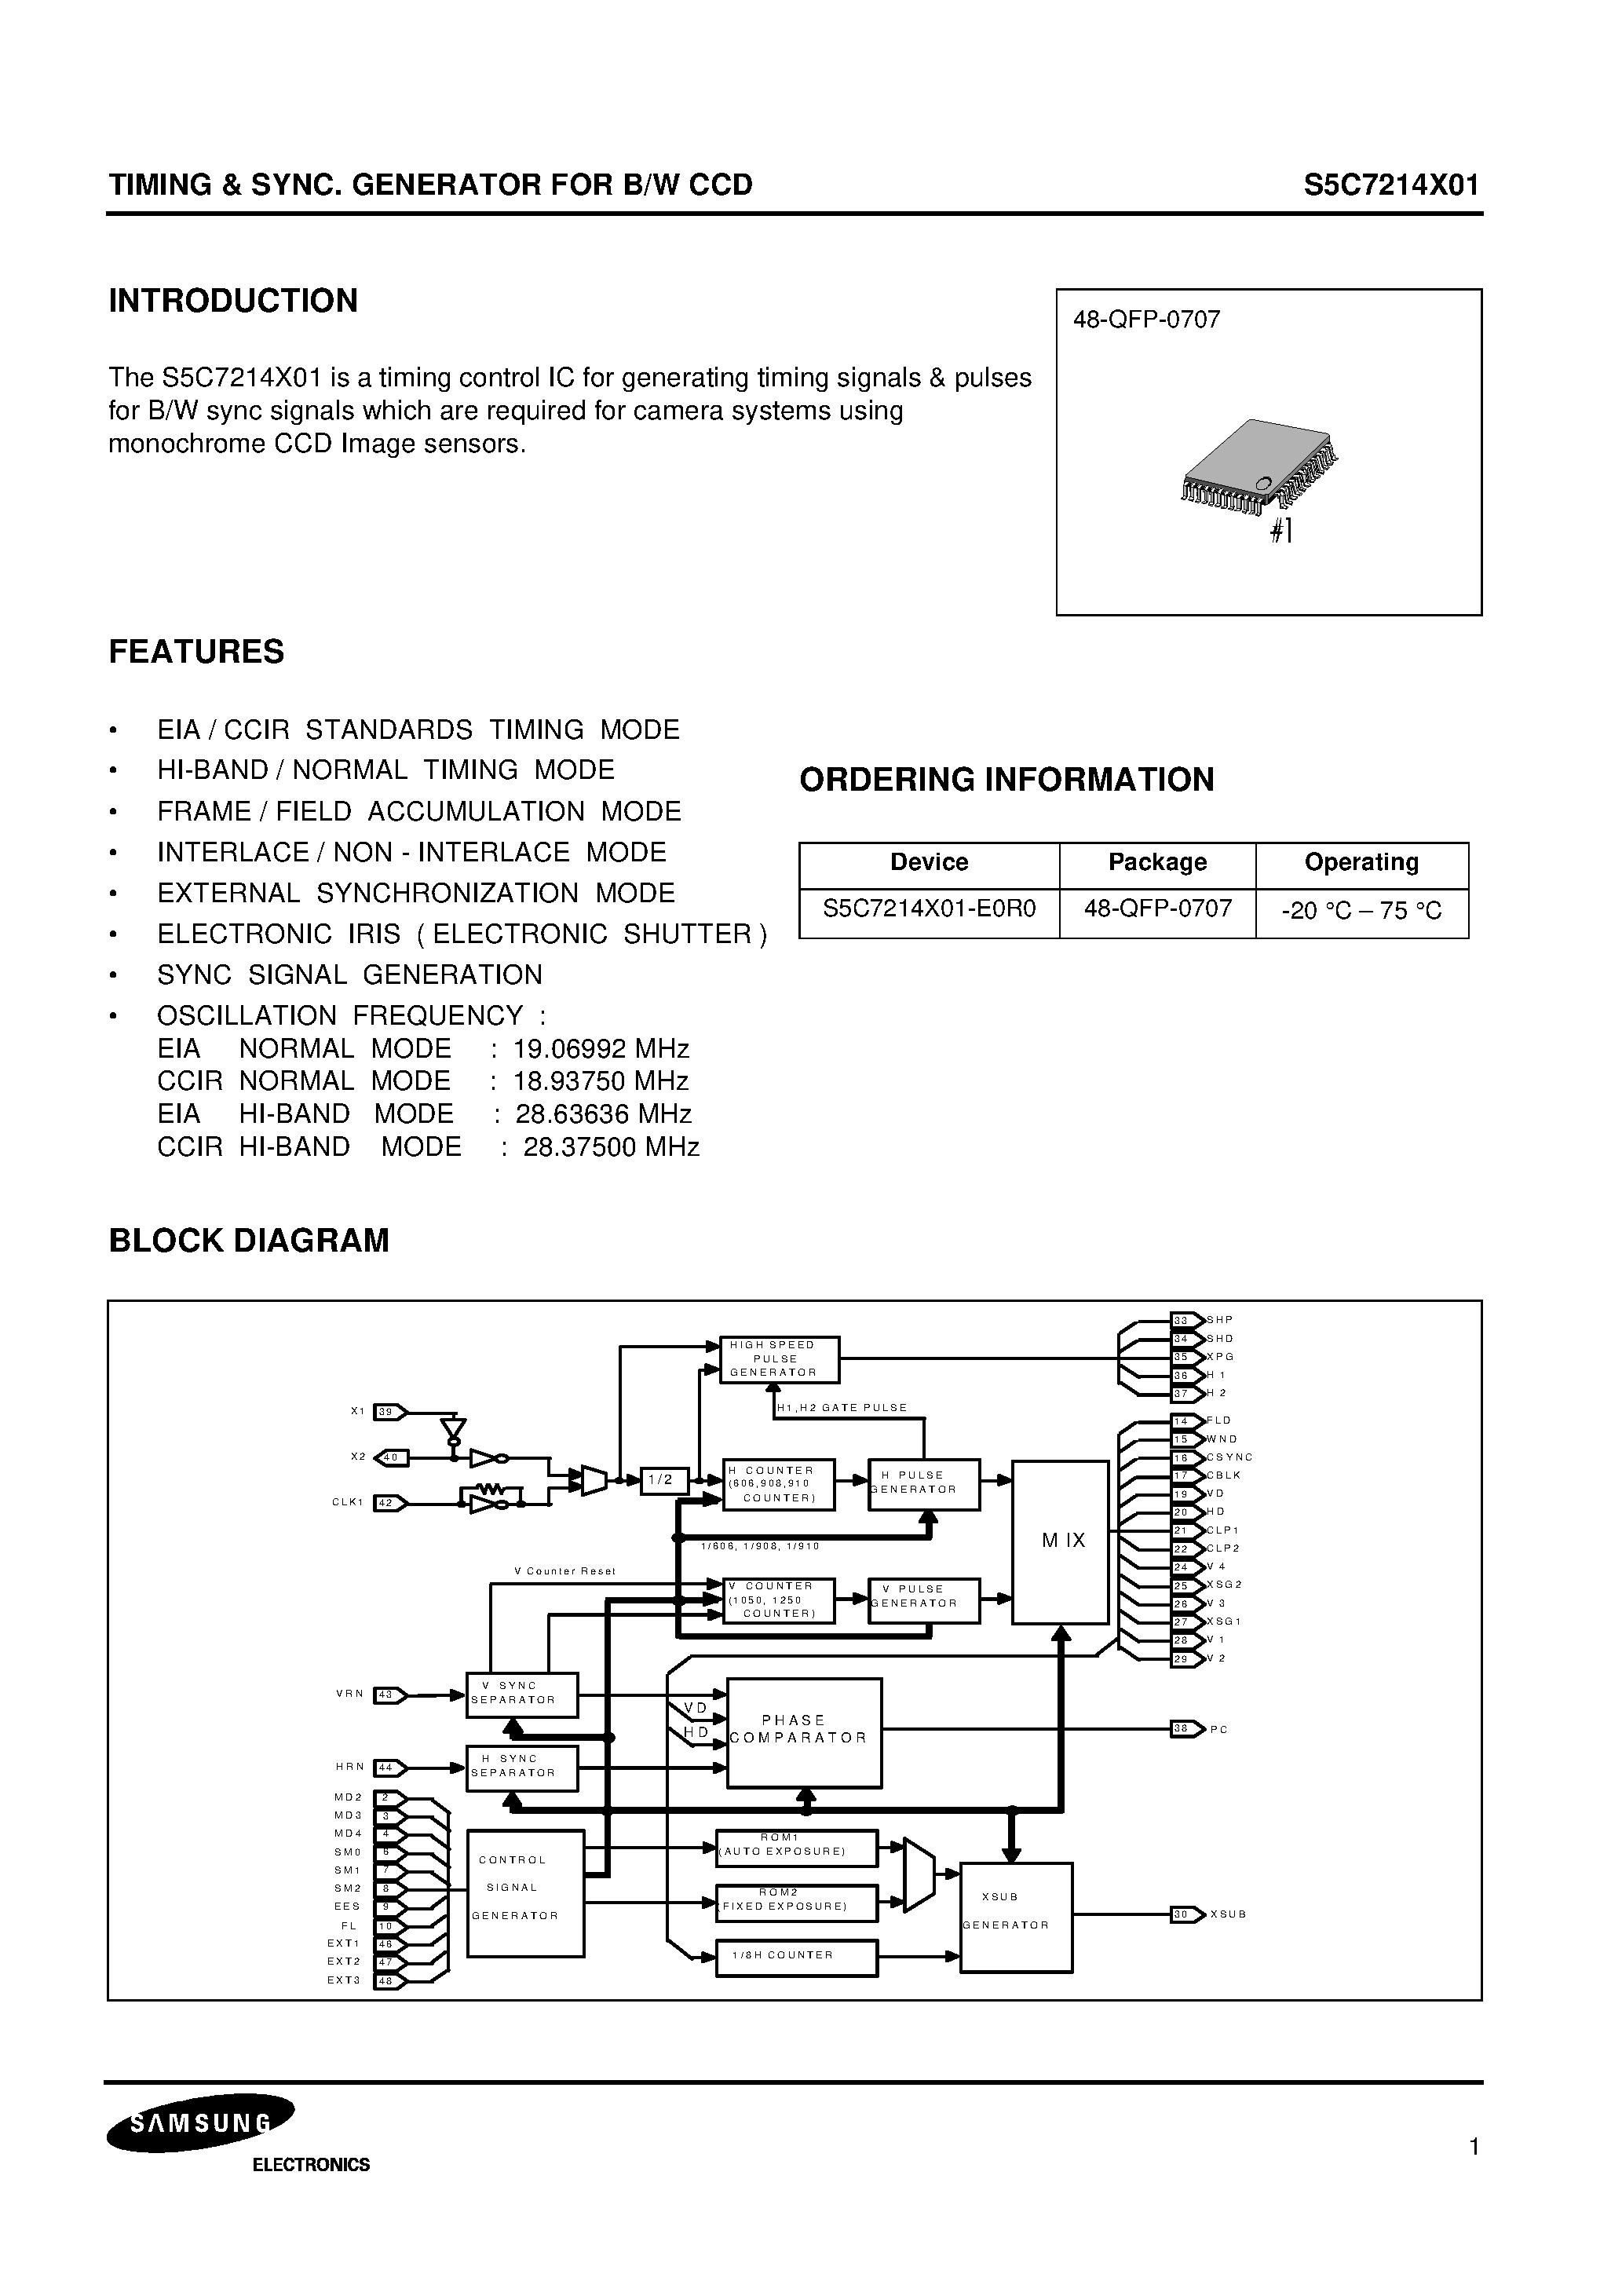 Datasheet S5C7214X01 - TIMING & SYNC. GENERATOR FOR B/W CCD page 1